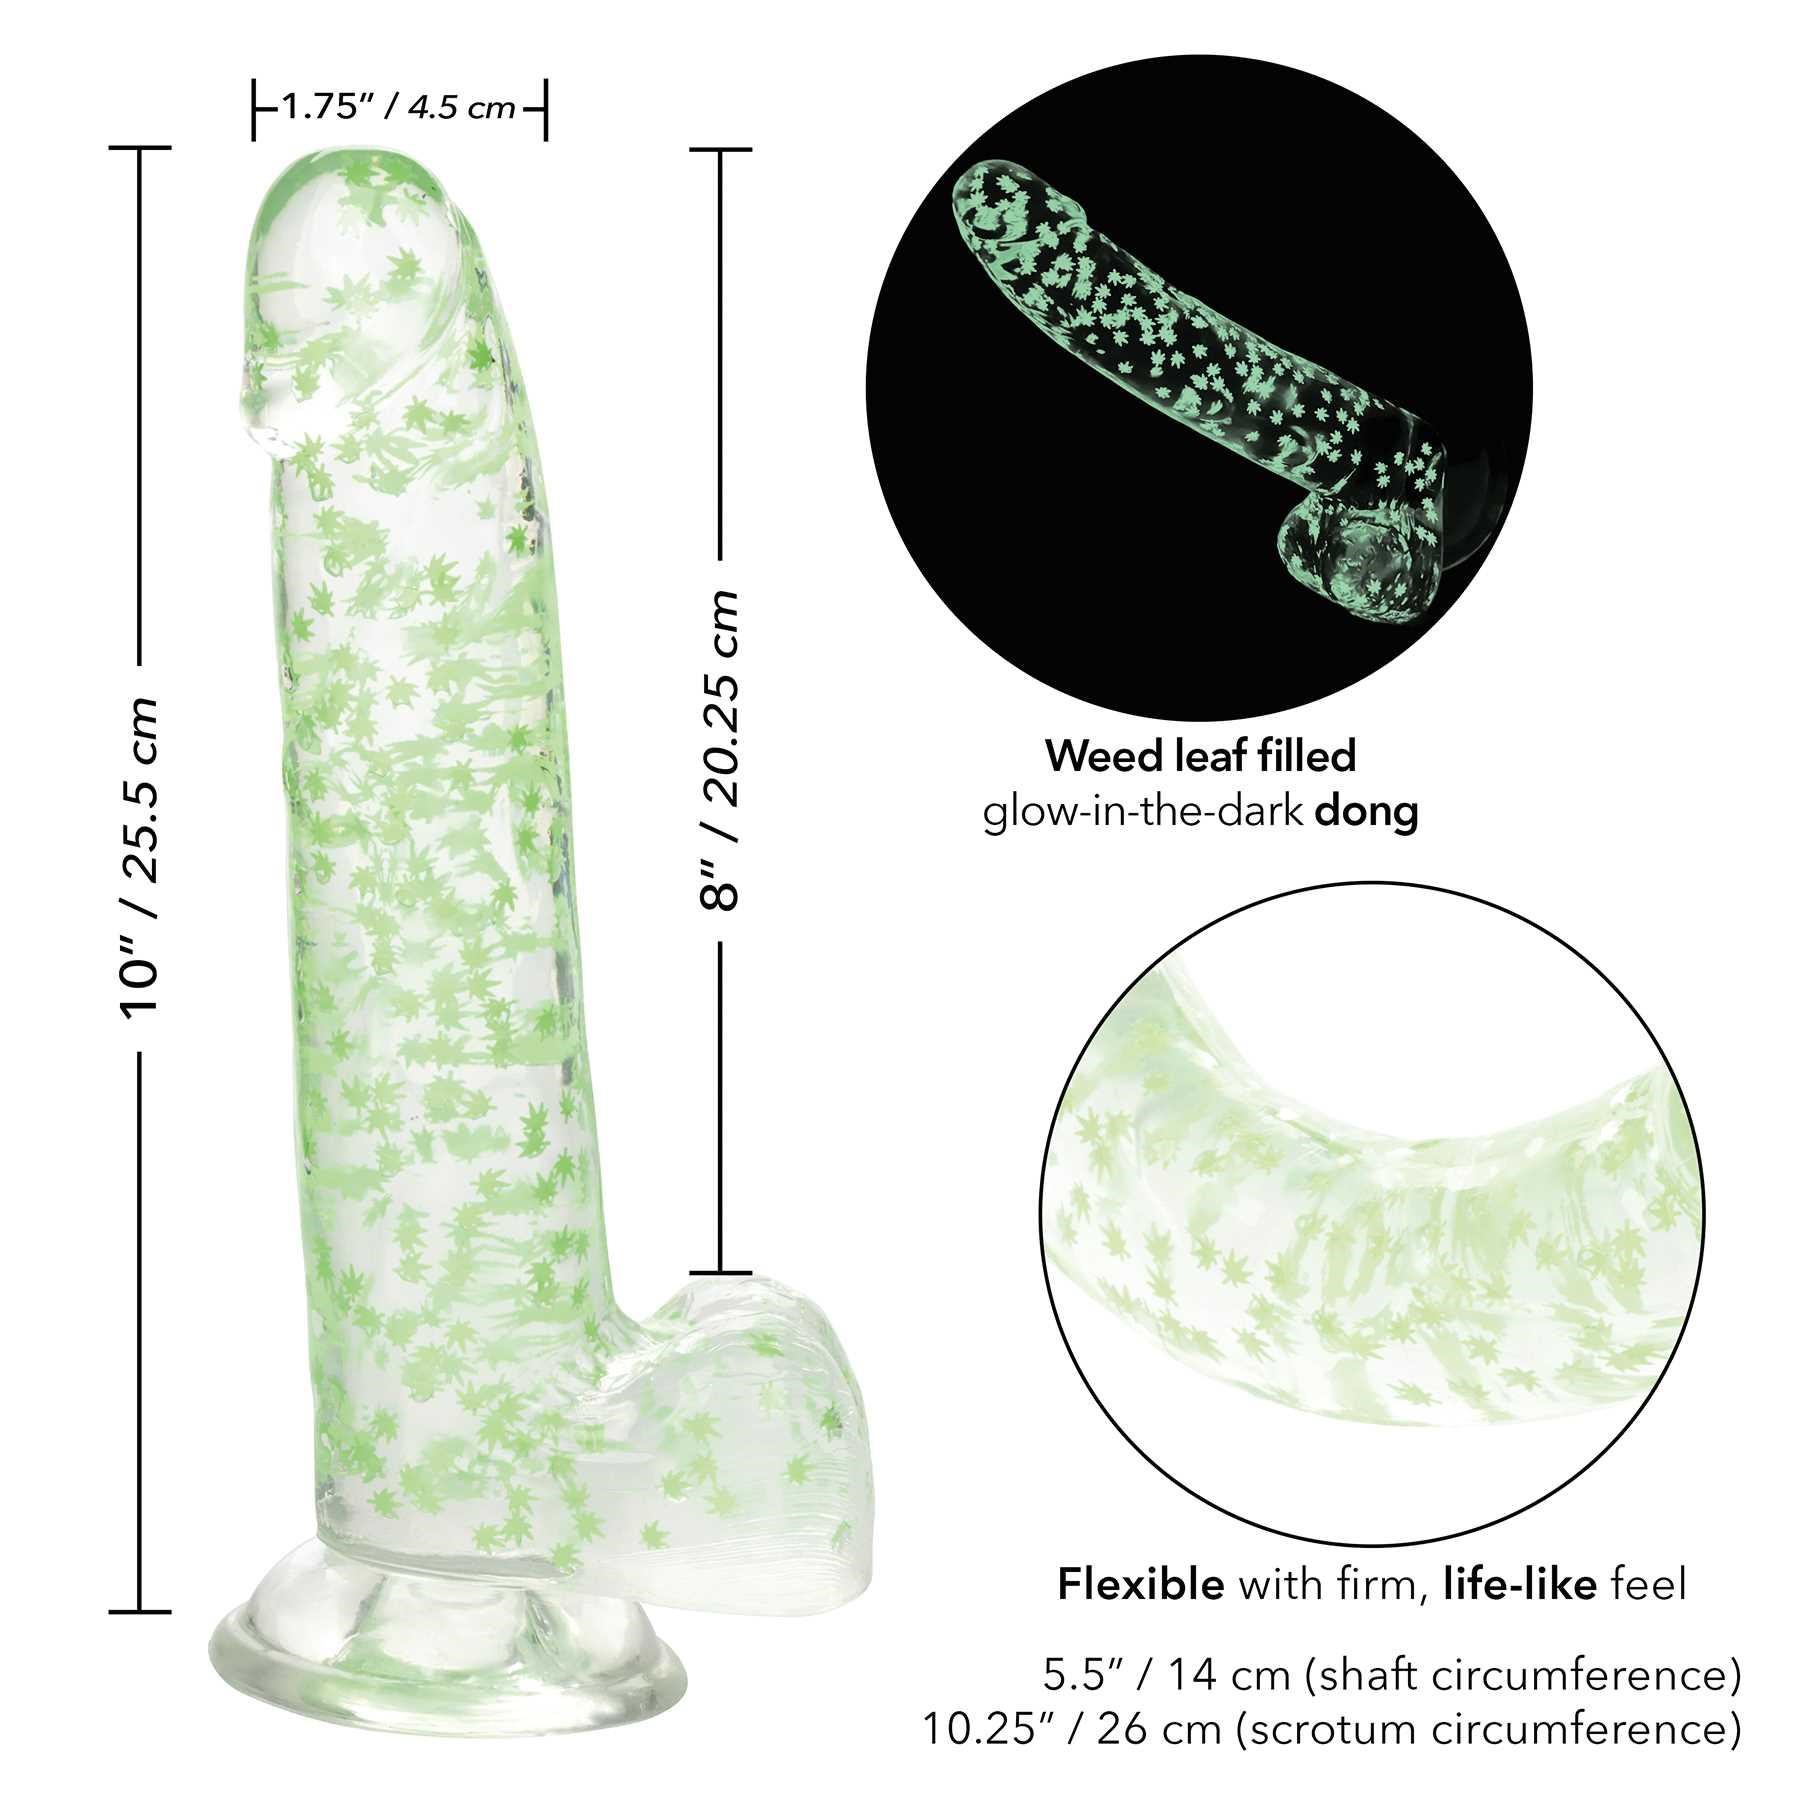 Naughty Bits Leaf Glow In The Dark Dildo specifications